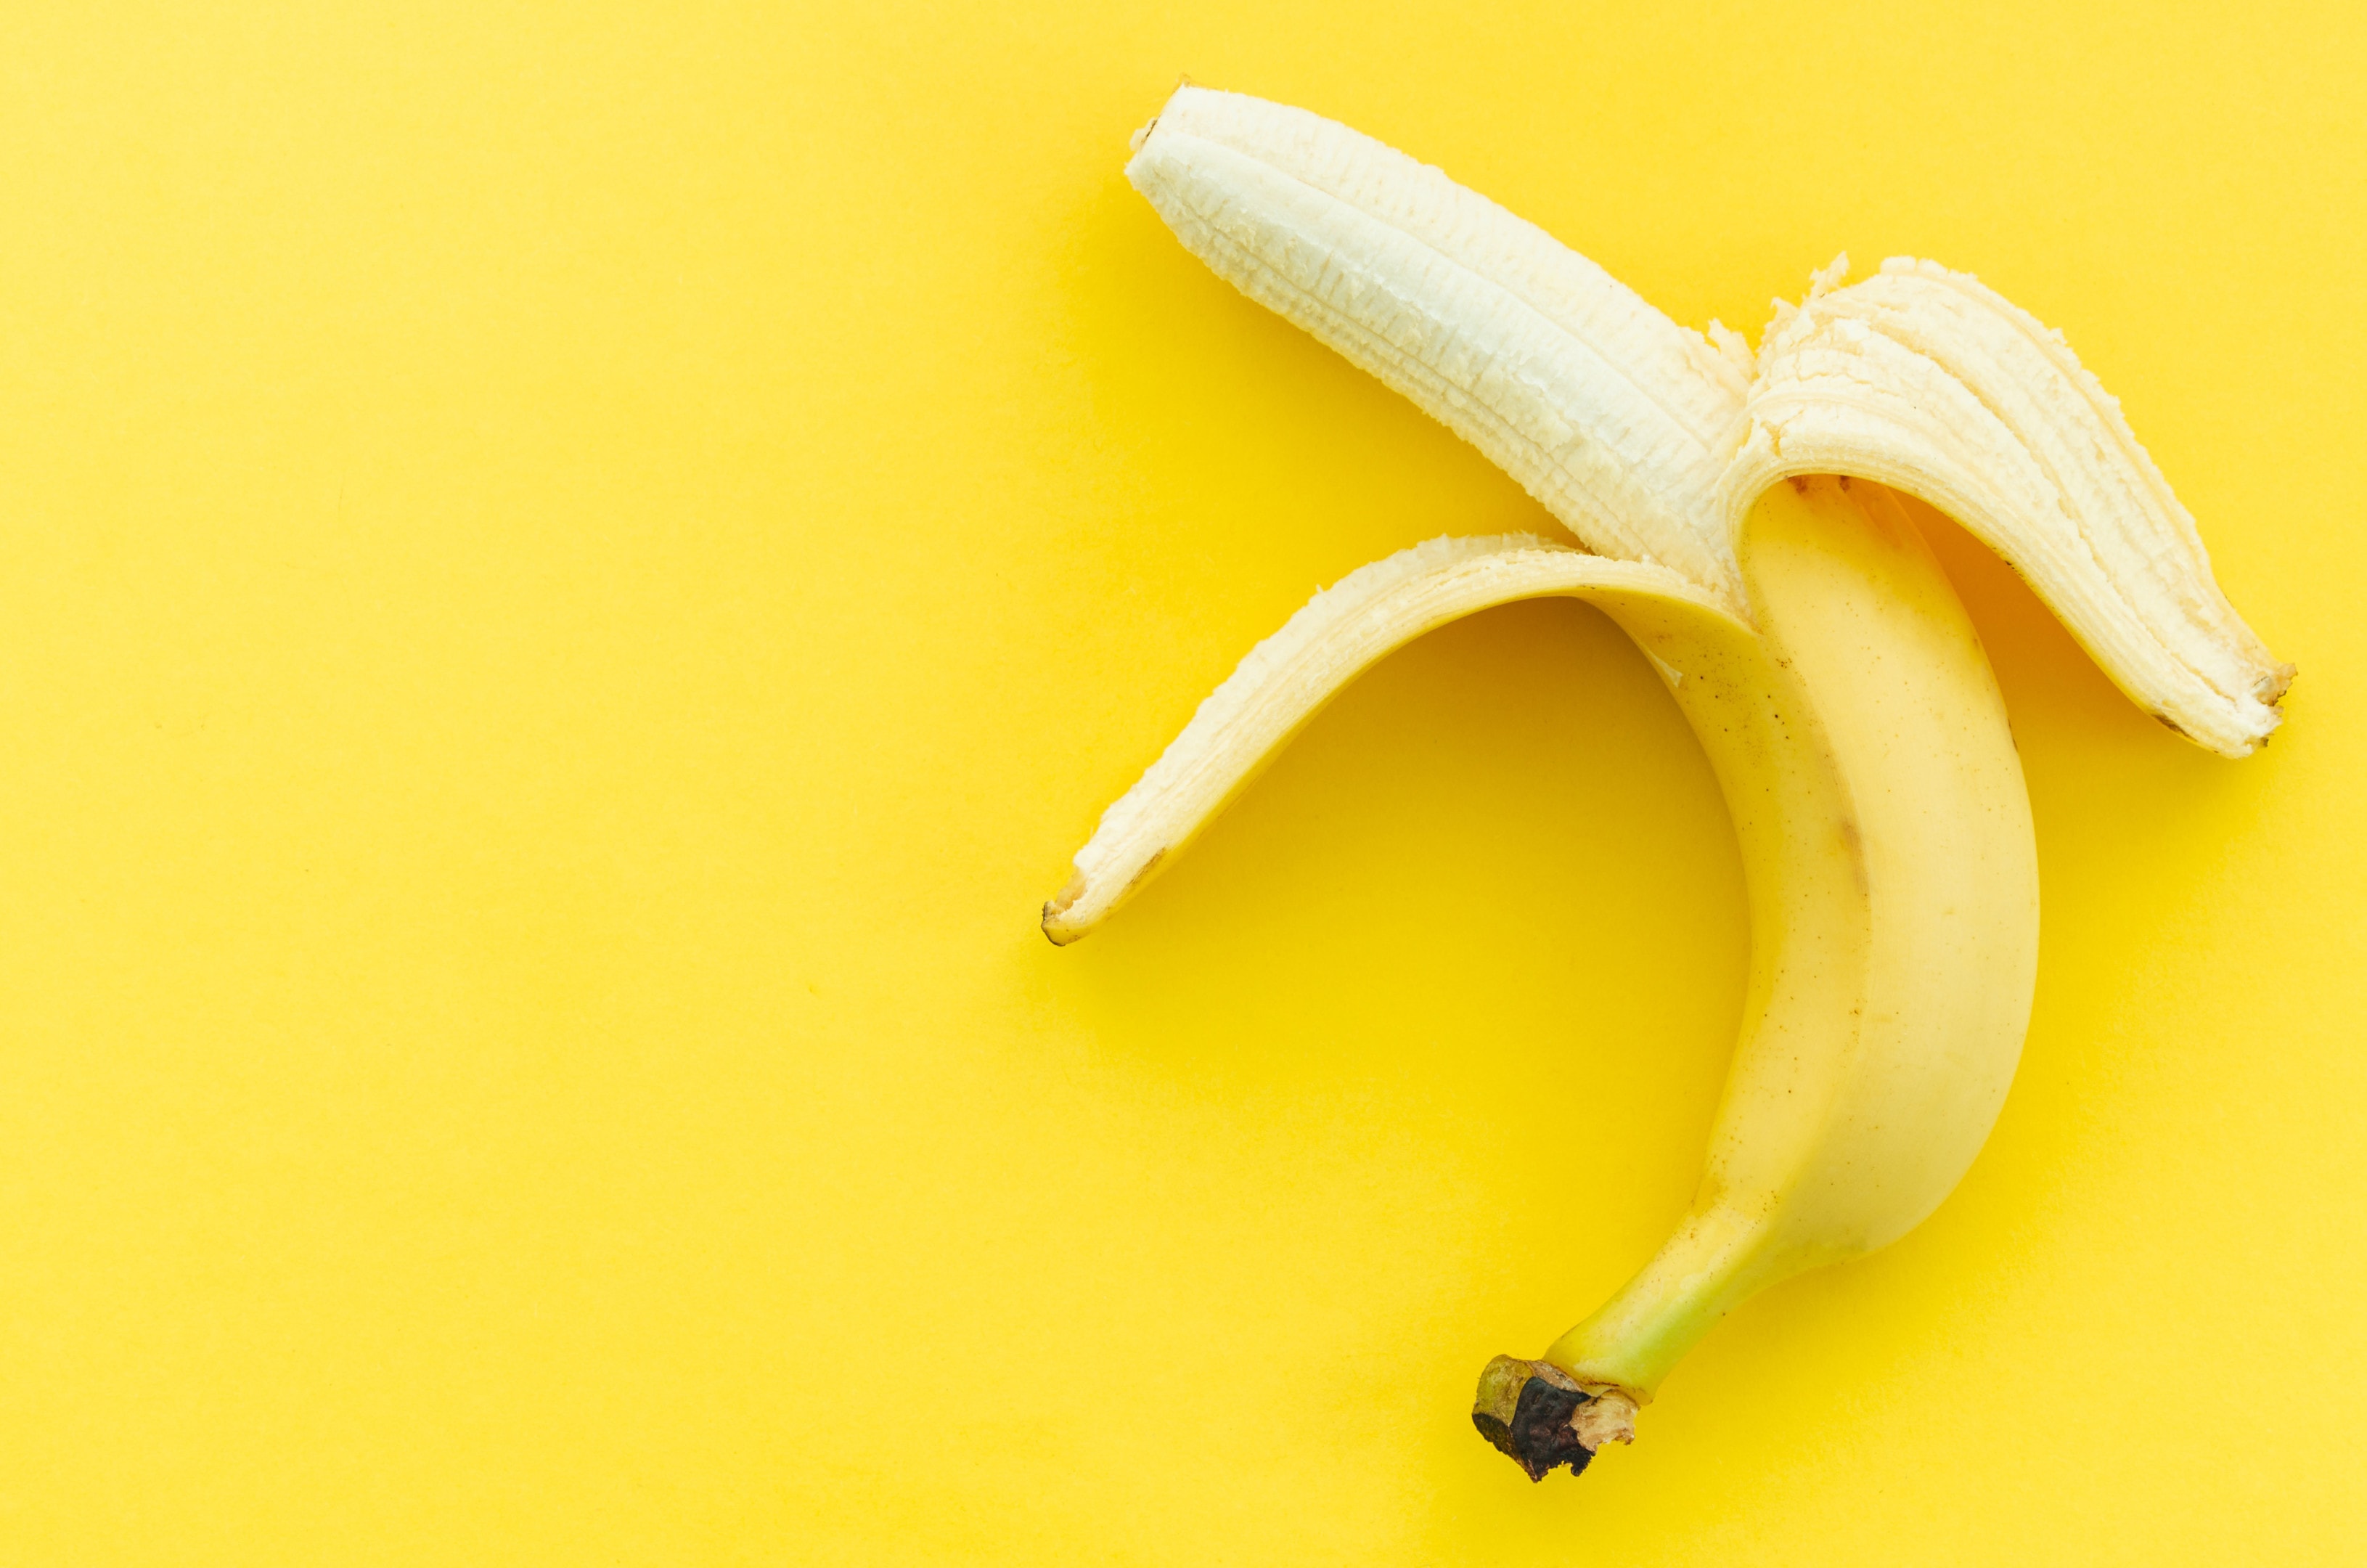 Freshly peeled banana. Banana is on on our list on what to eat to build curves.